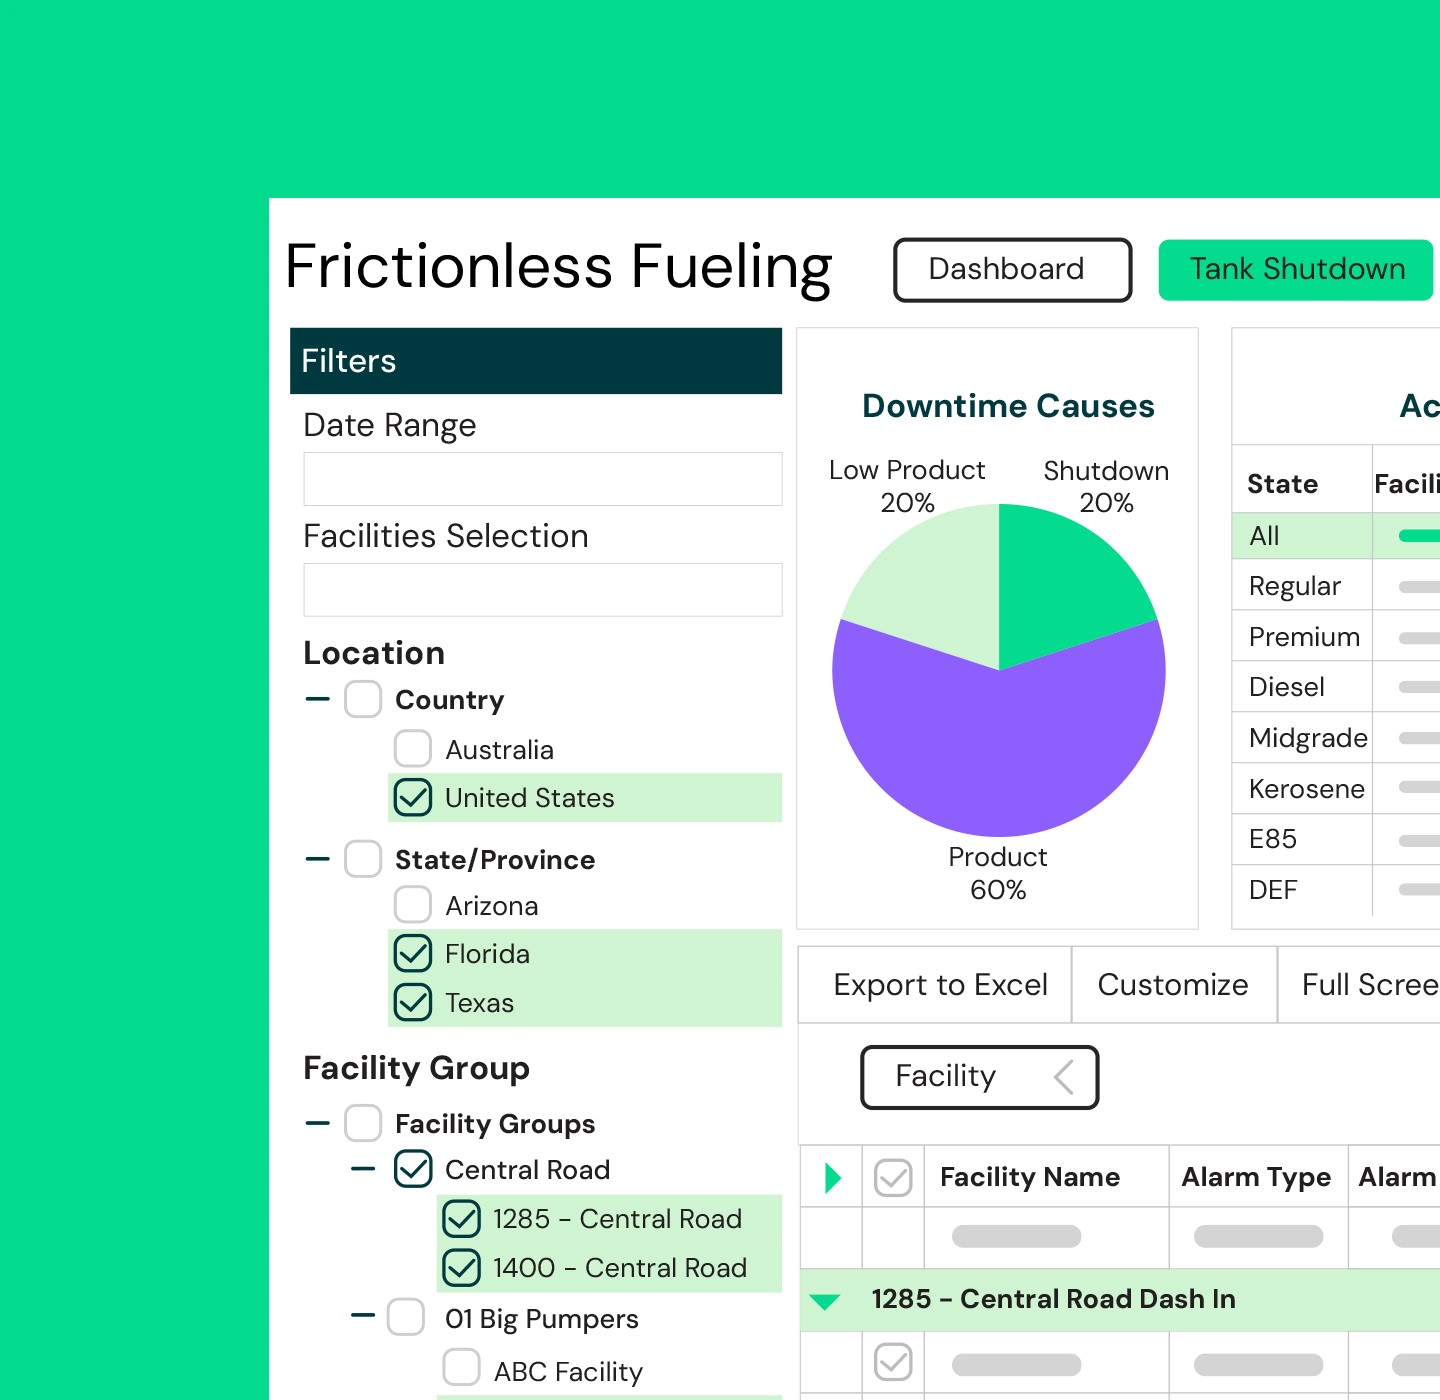 Frictionless fueling software showing downtime causes and tank shutdowns by location down to the site and dispenser level.